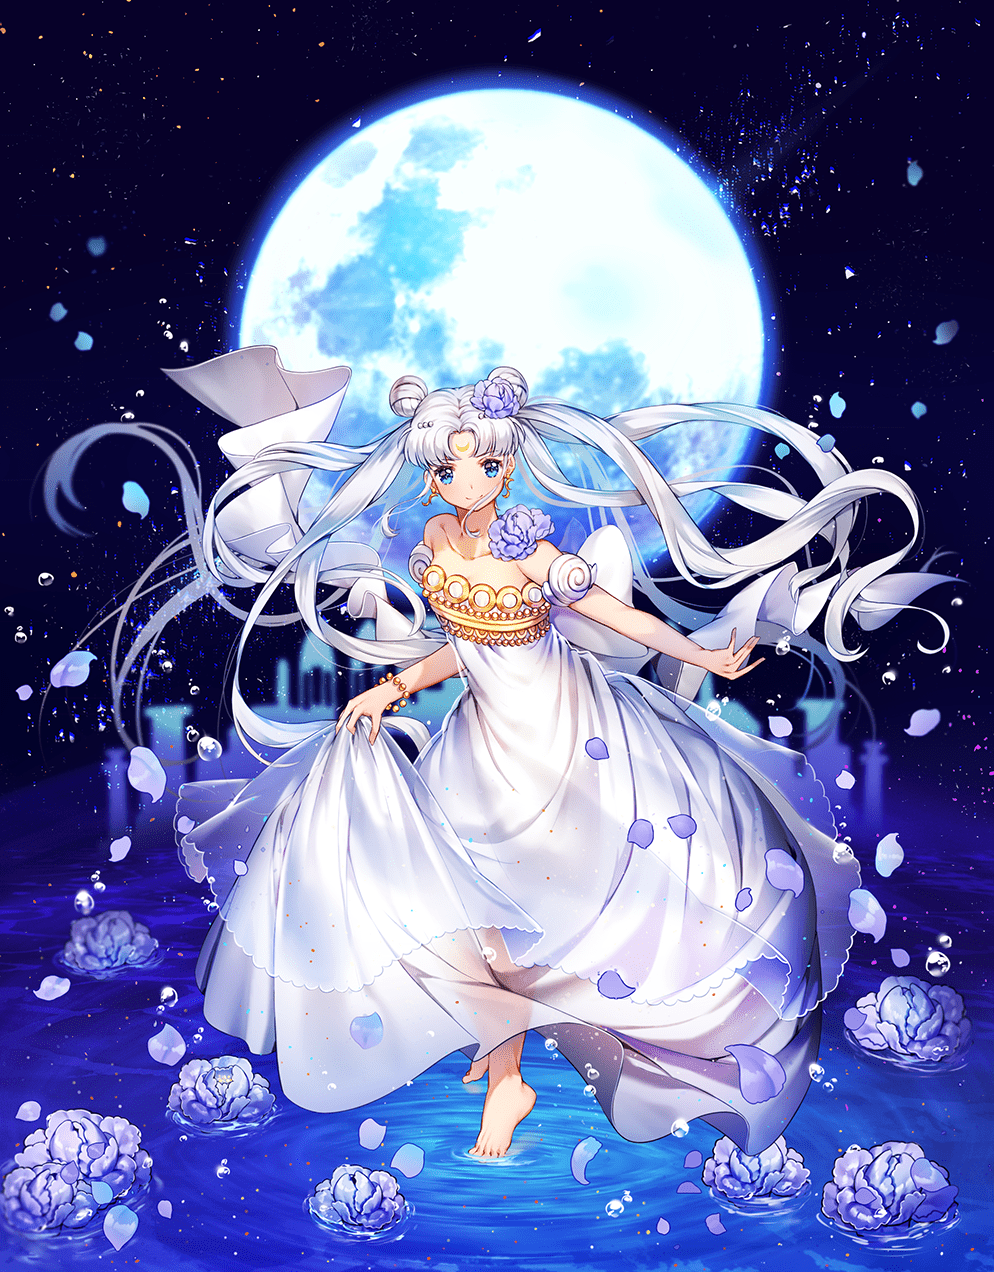 Fate Grand Order  Medea Lily  Beauty Queen in The Sea Wallpaper Engine  Anime  Anime Live wallpapers Anime wallpaper